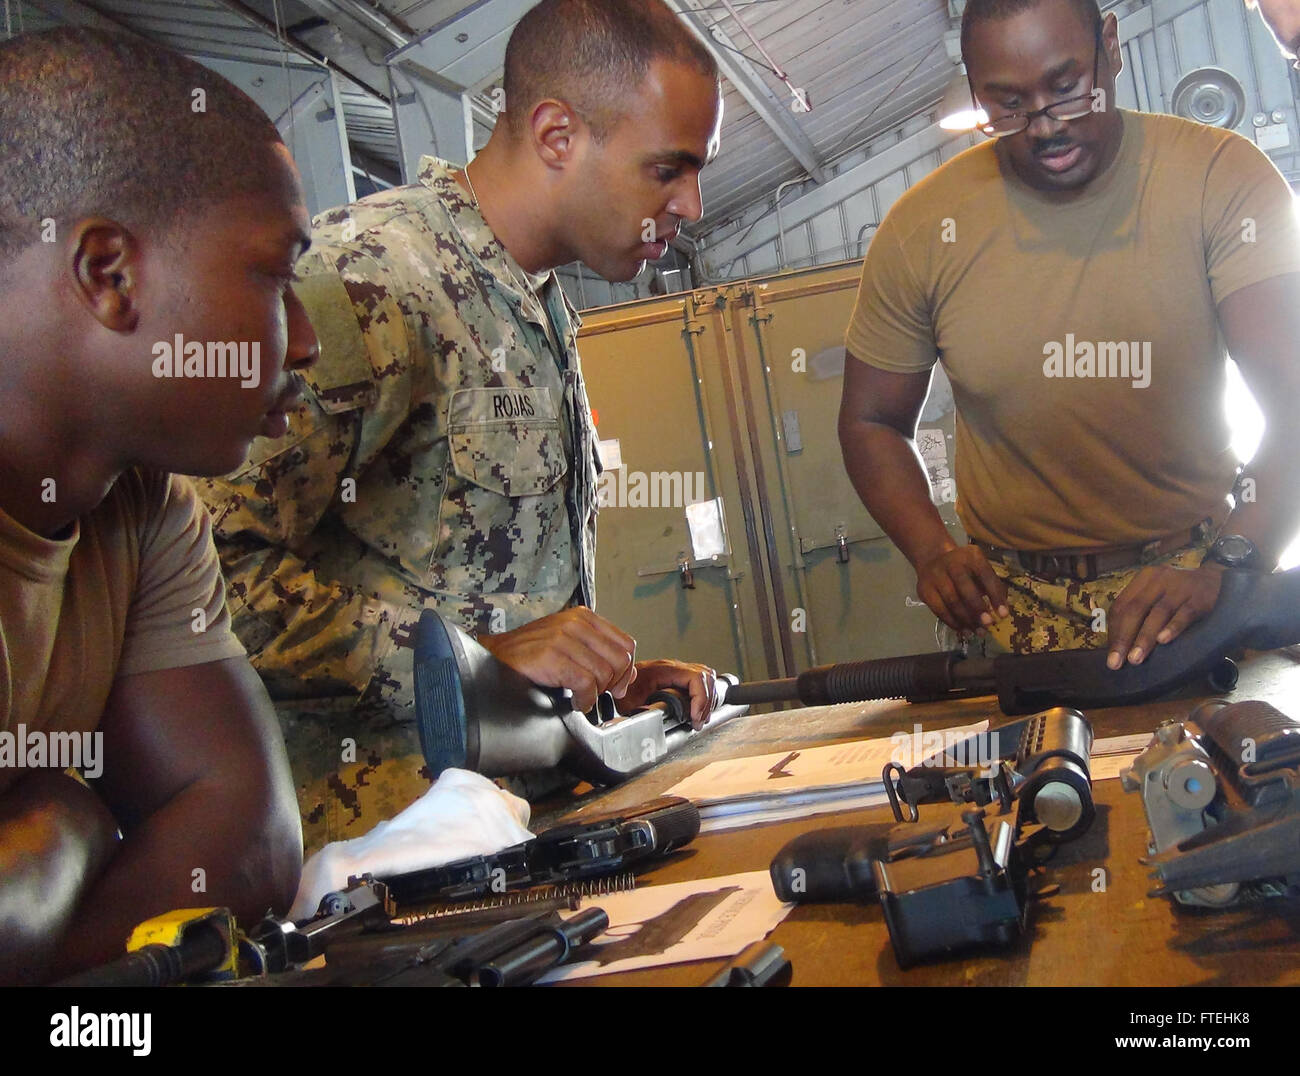 ROTA, Spain – Chief Boatswain’s Mate Cesar Rojas, center, along with other members of Coastal Riverine Squadron 4, receives assembly instructions on the Mossberg M500 shotgun from Gunner’s Mate 1st Class Jerome Claybron as a part of an Expeditionary Warfare training circuit at Naval Station Rota, Spain. Stock Photo